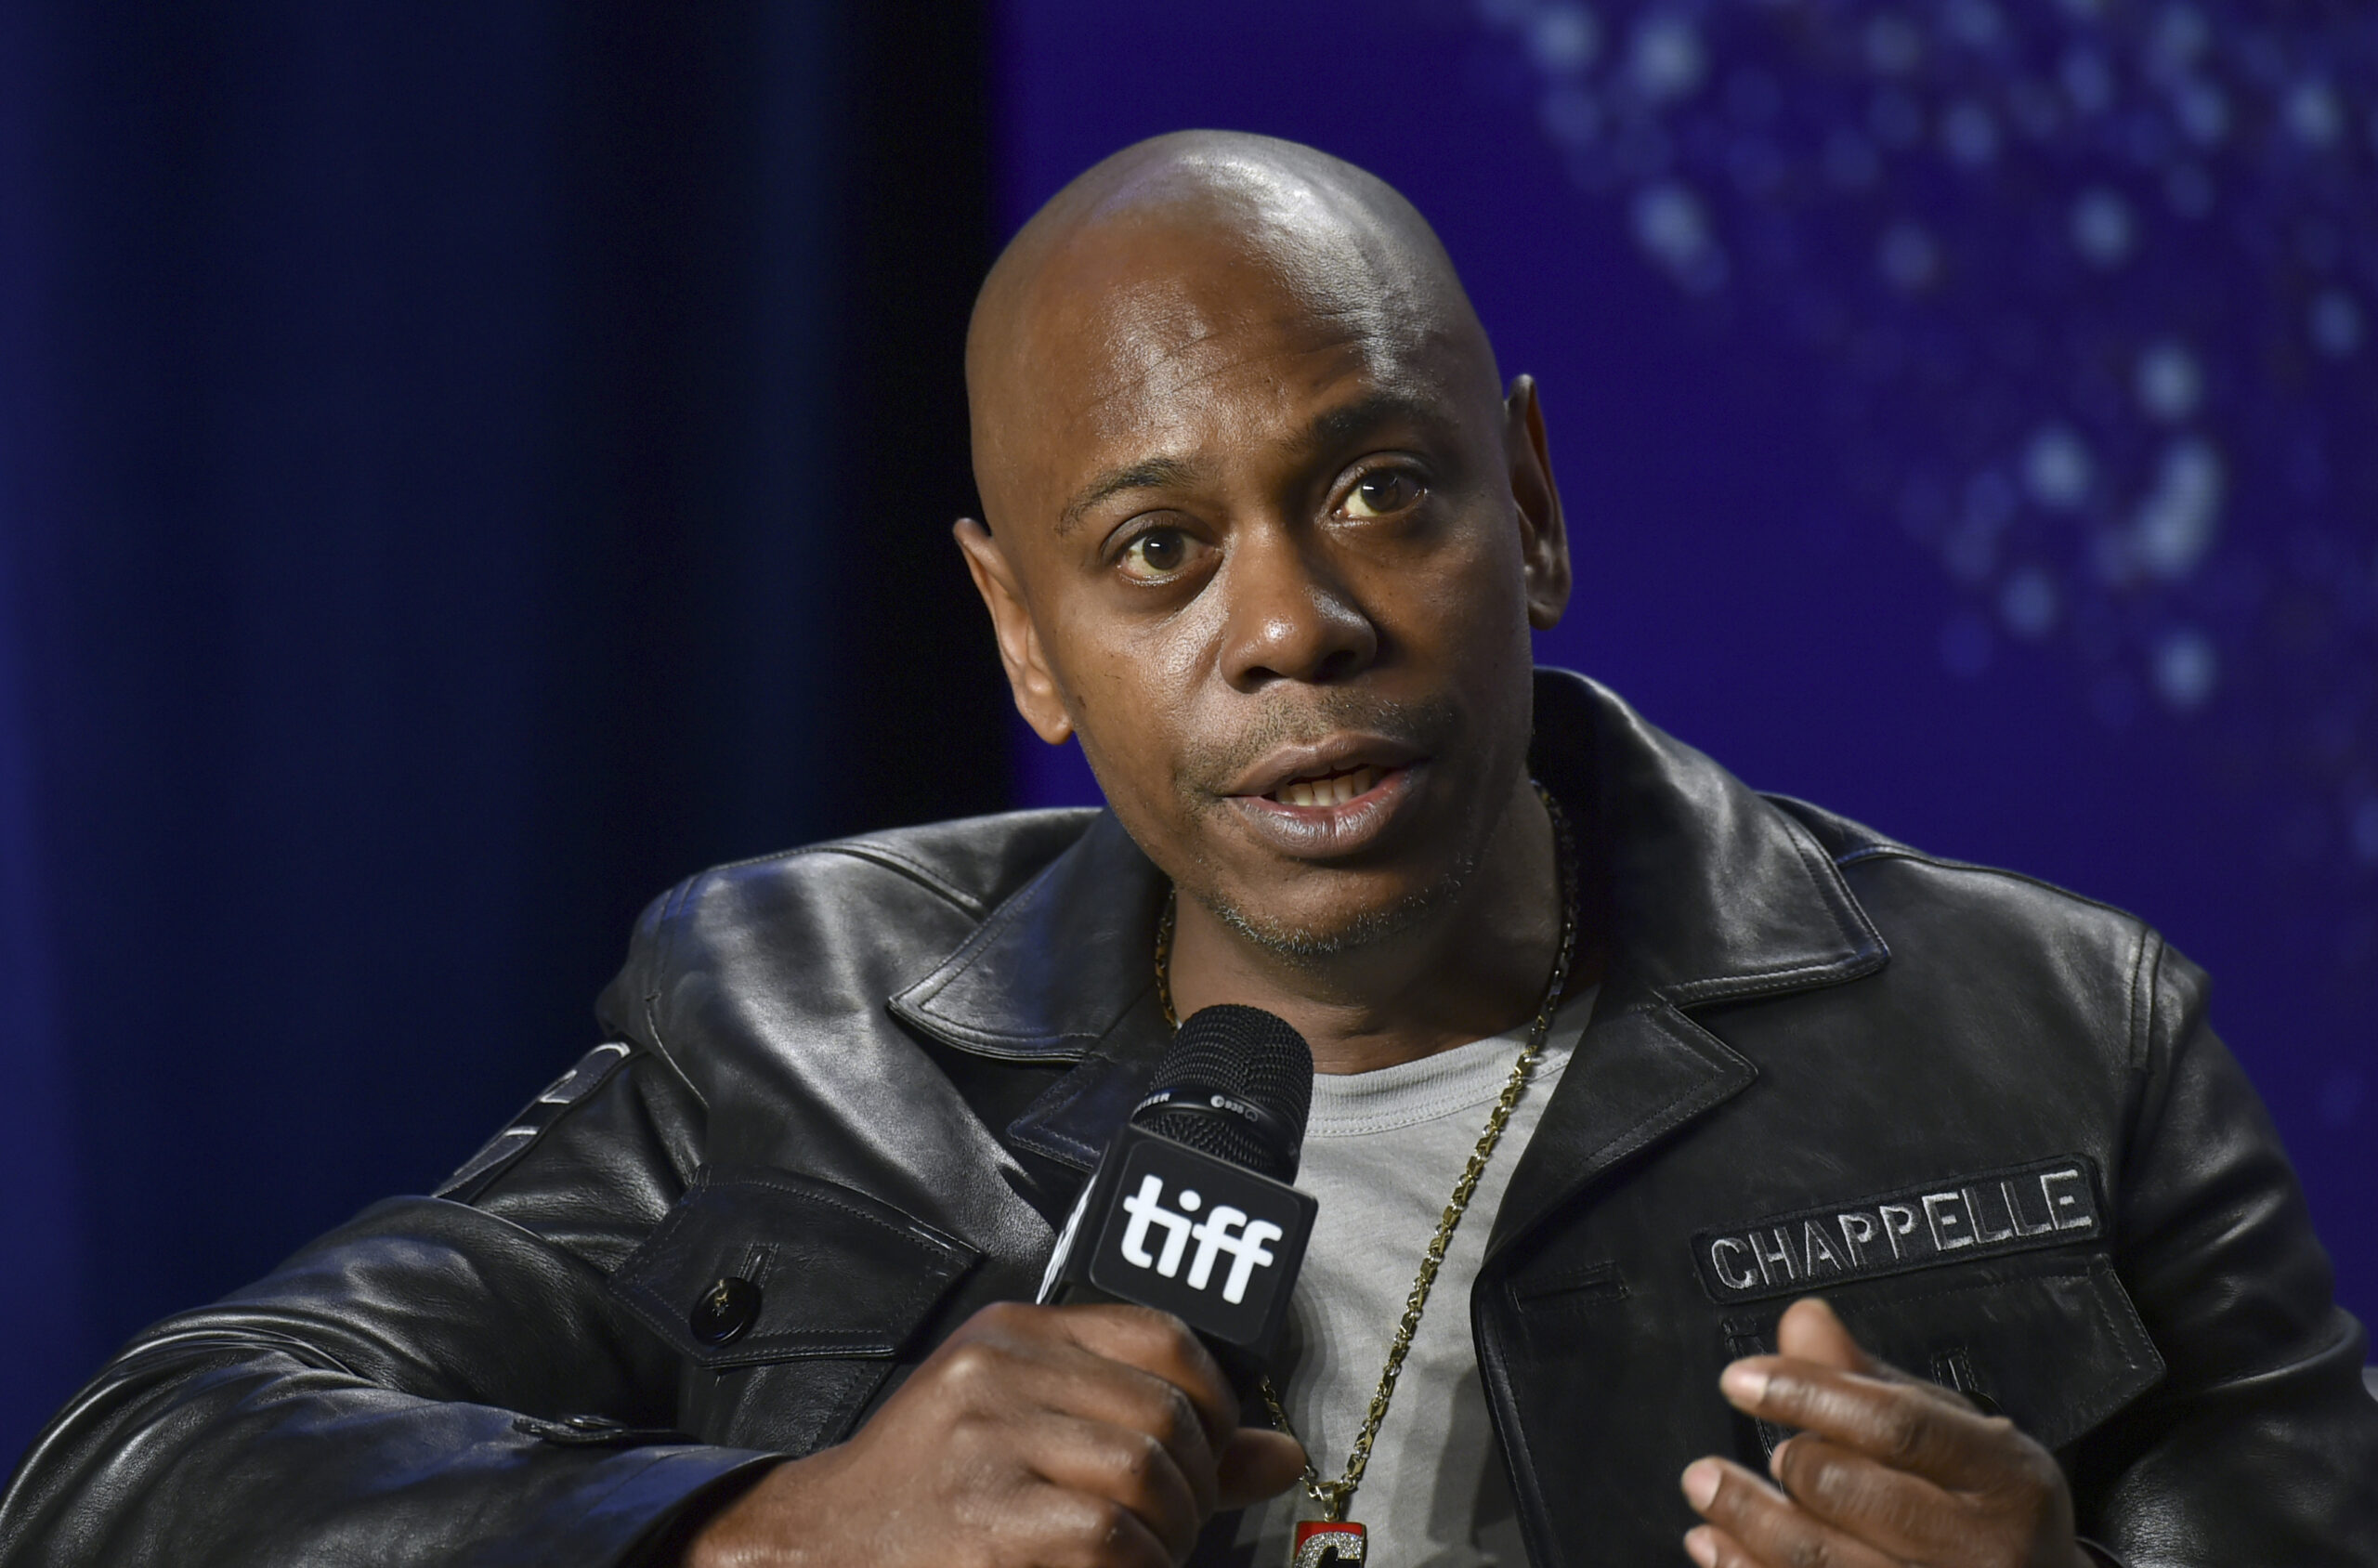 Dave Chappelle’s New Netflix Stand-Up Special Launches